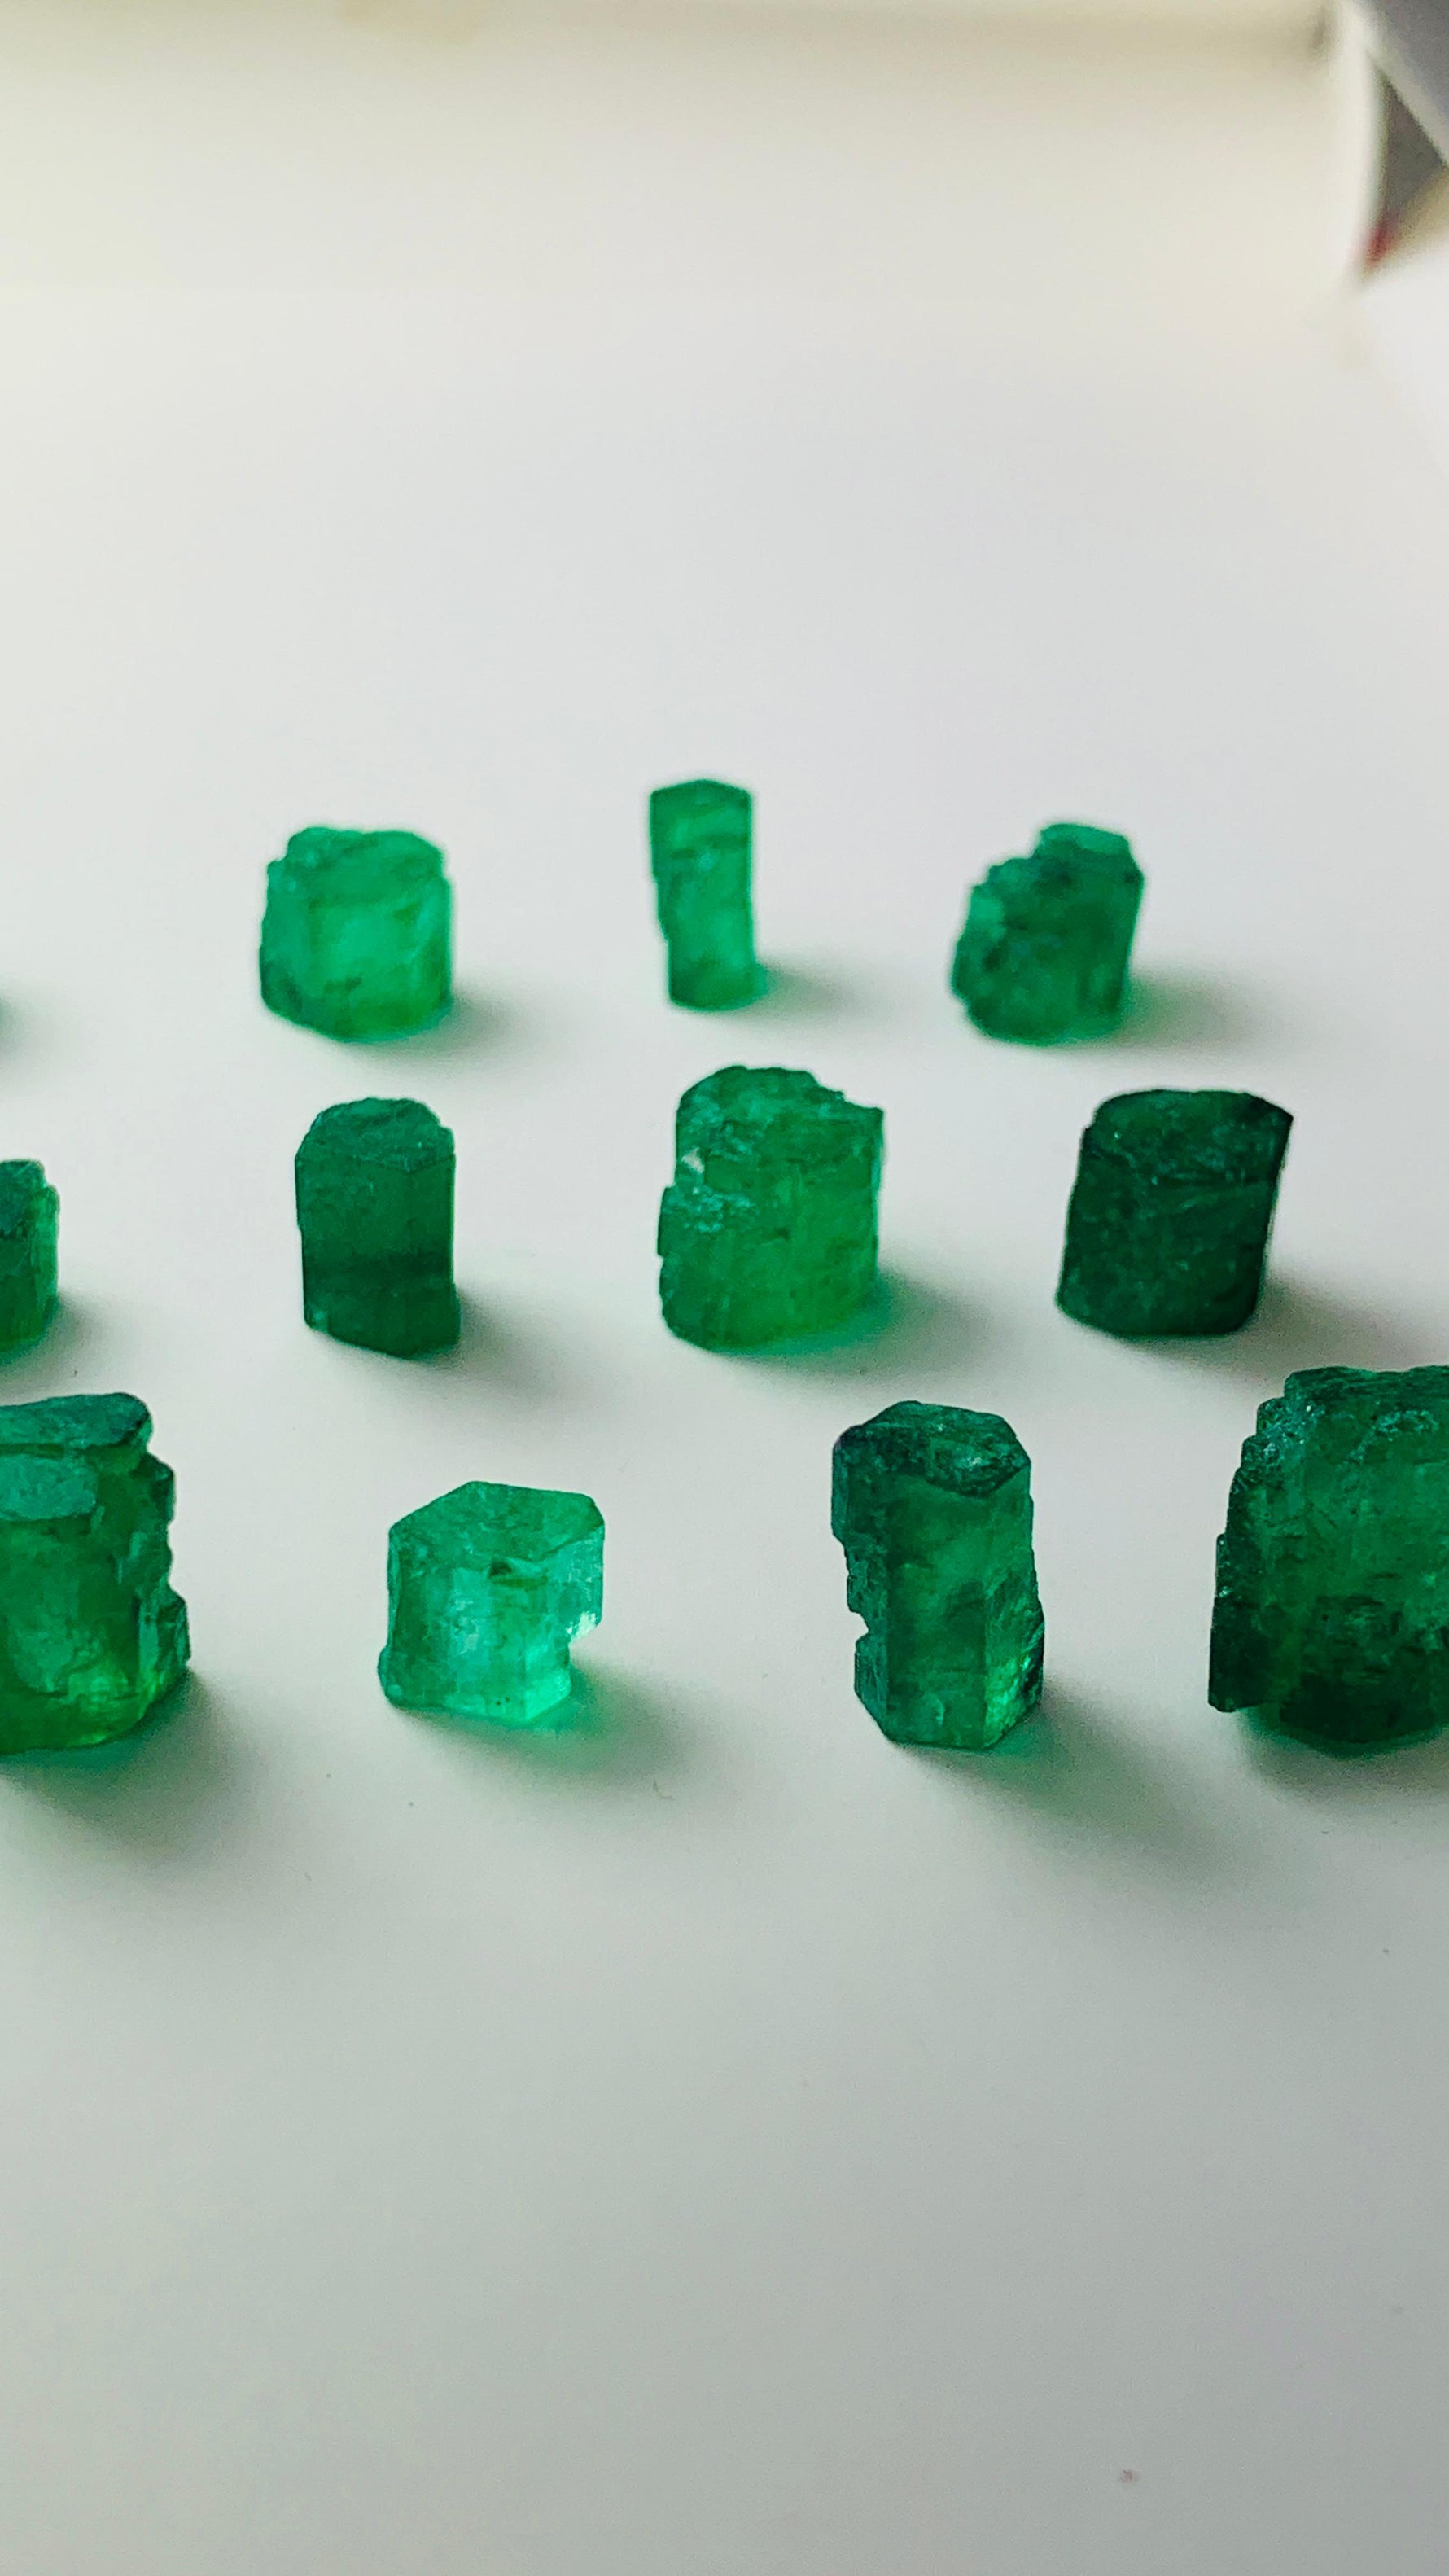 You Also May Like This Emerald Stone.